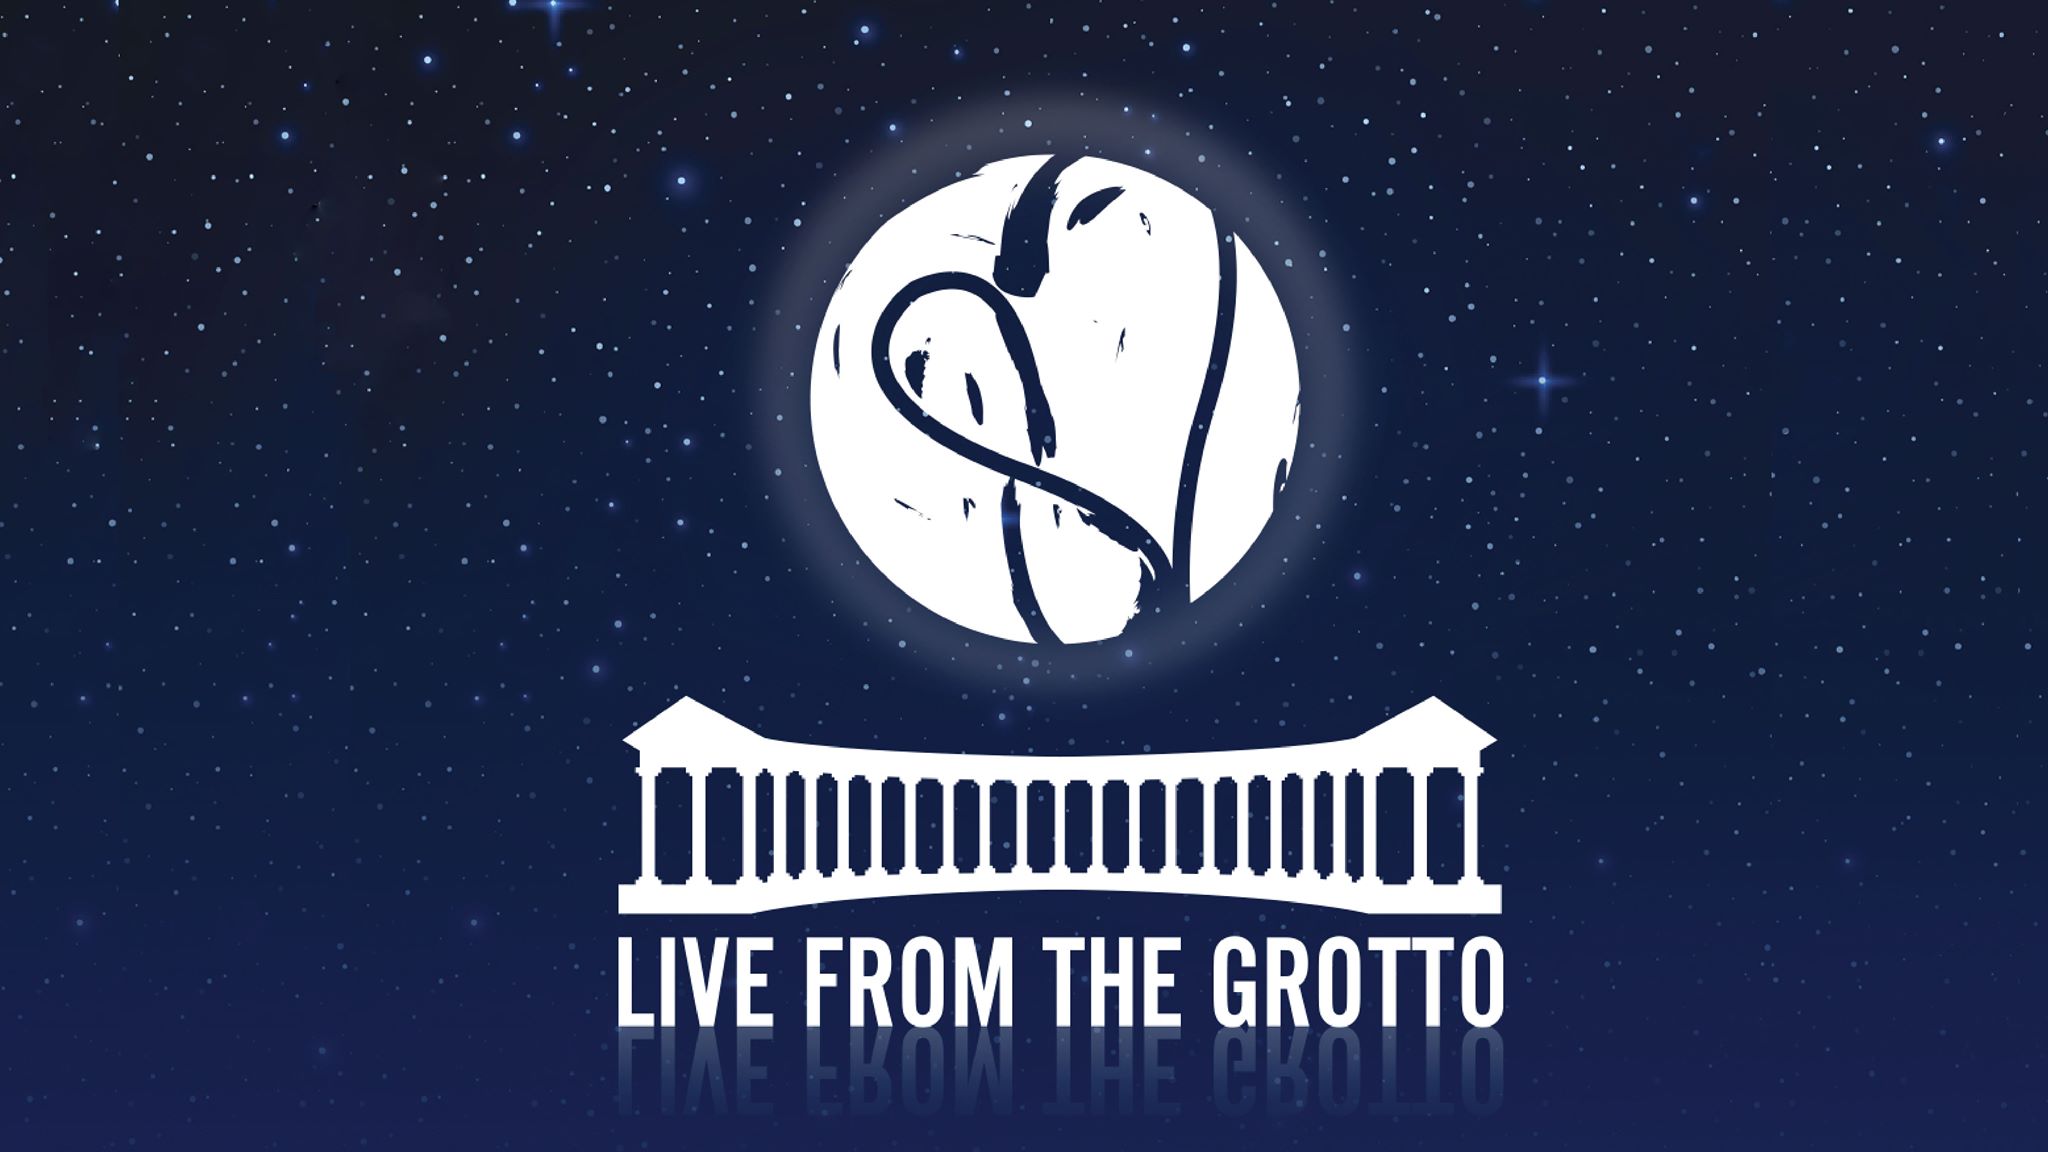 YES THEATRE LIGHTS UP THE GROTTO WITH LIVE CONCERT SERIES